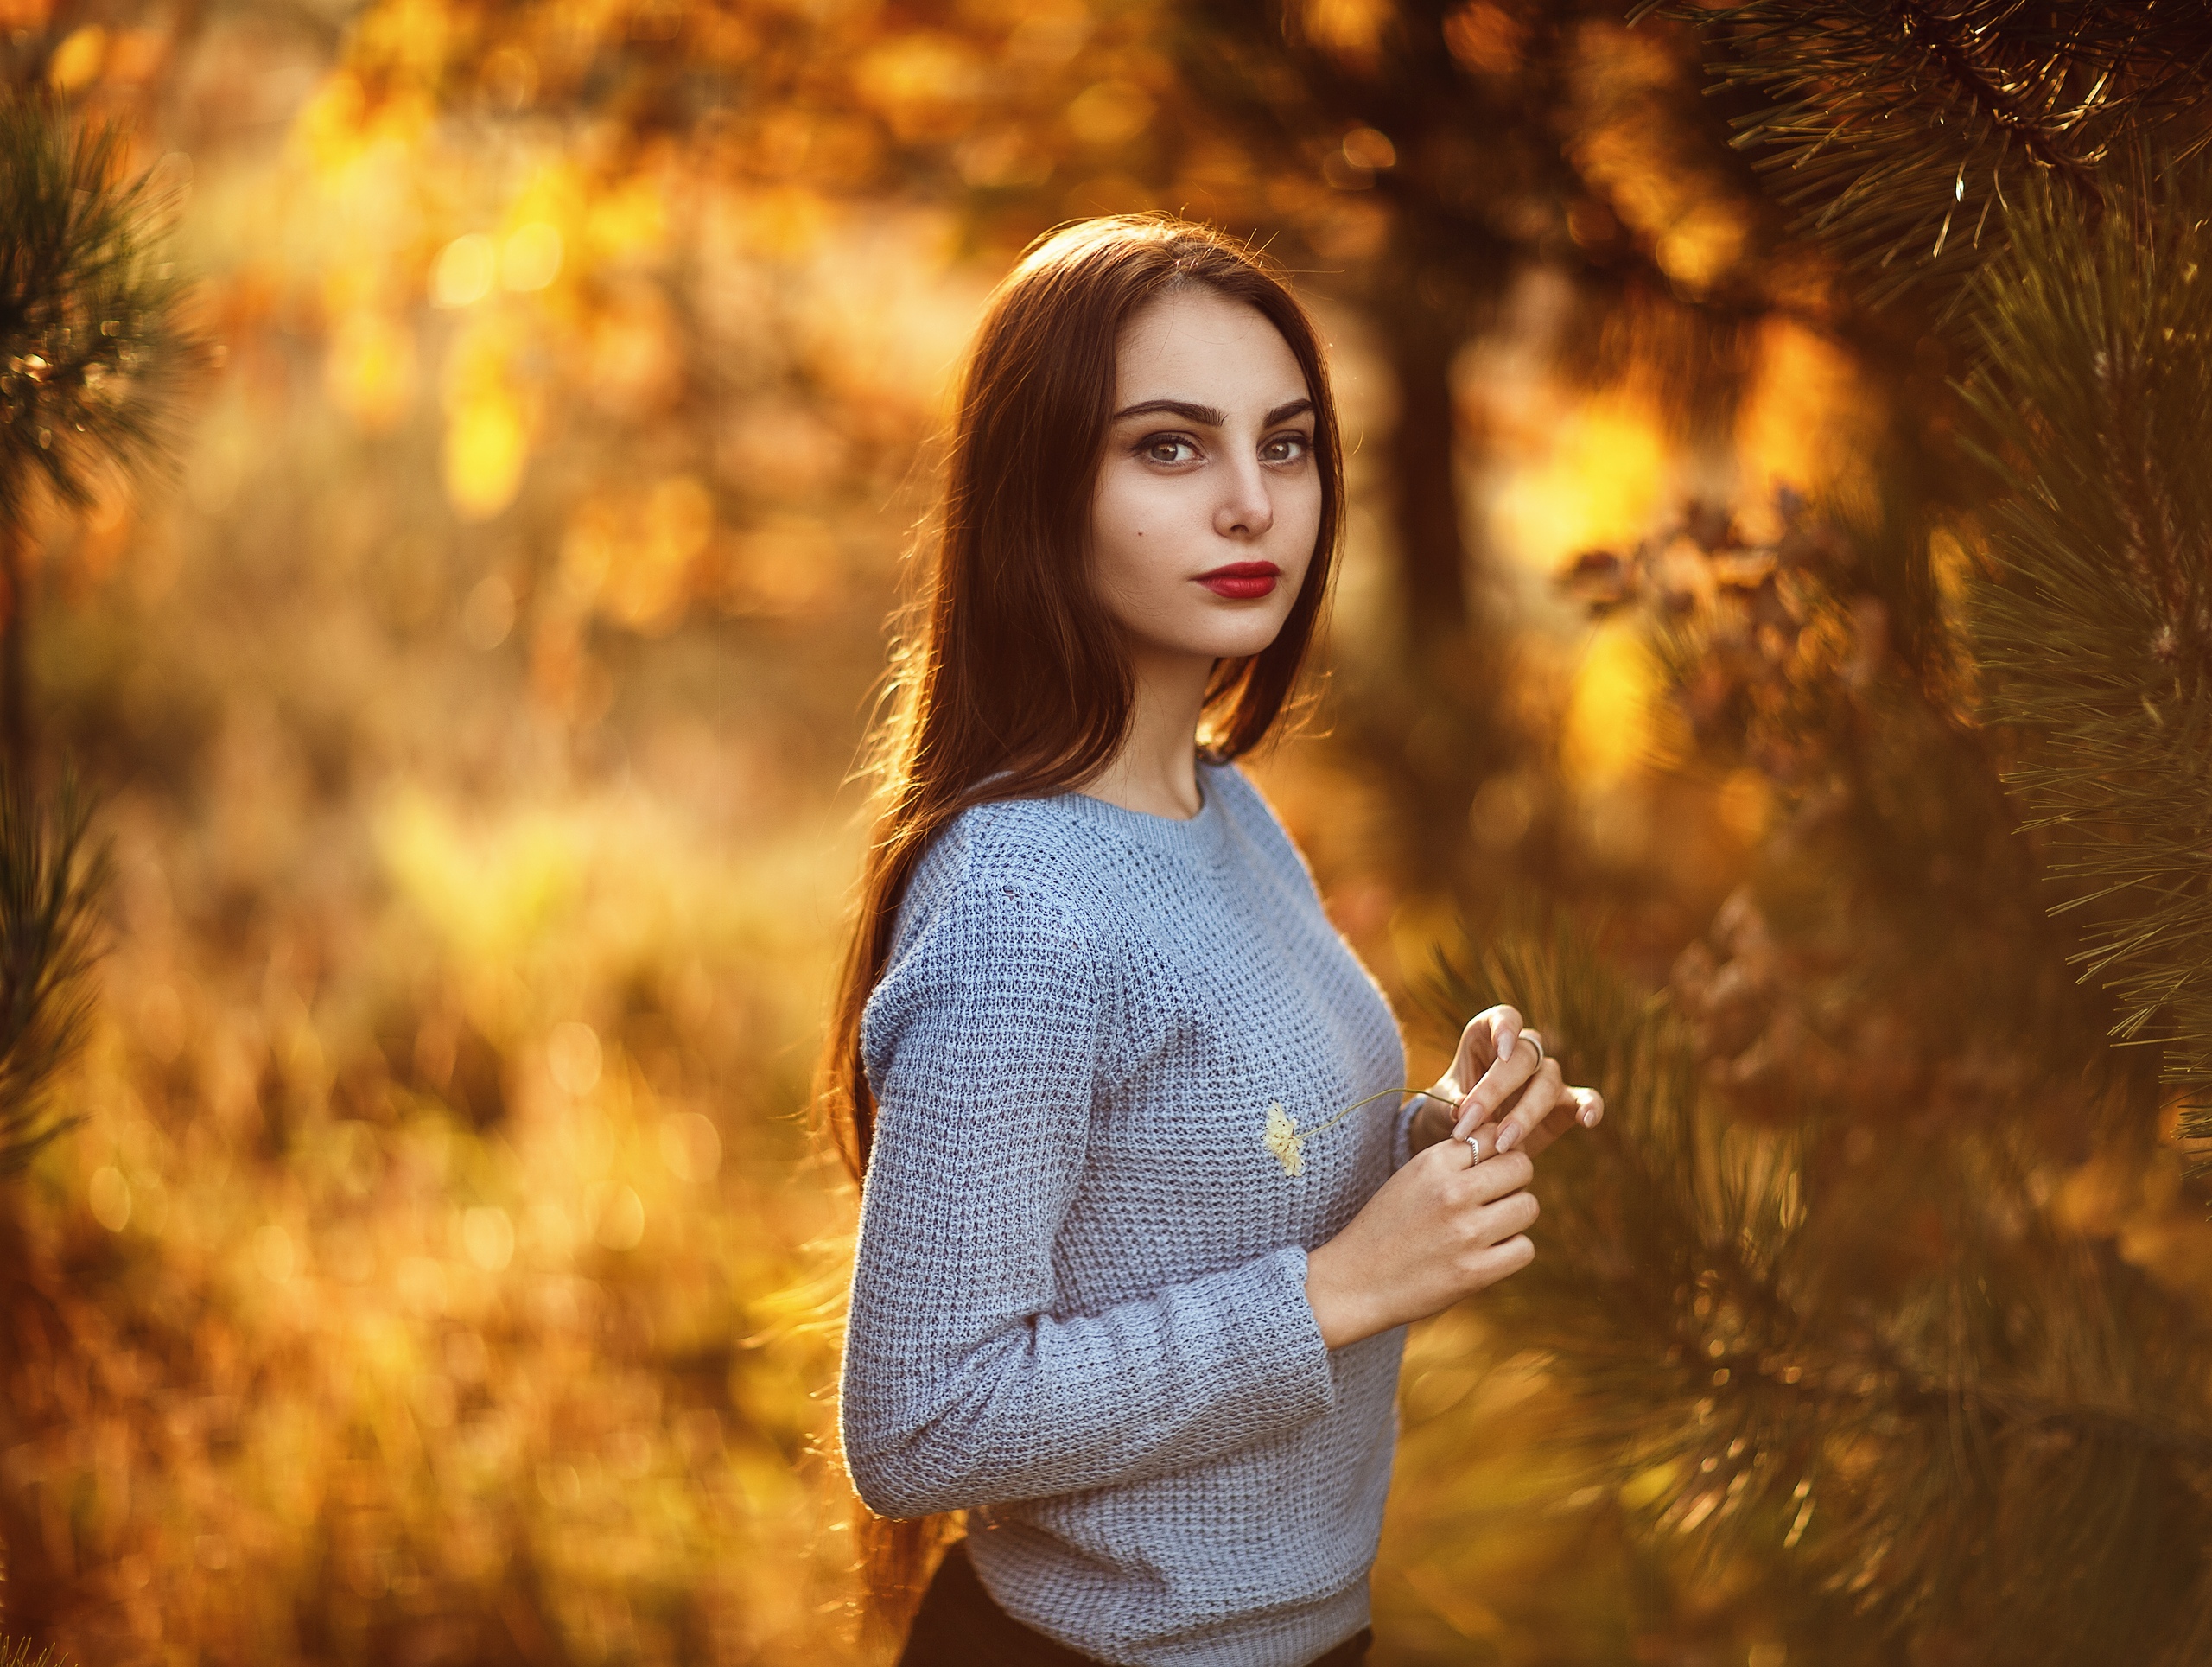 Women Model Brunette Long Hair Portrait Outdoors Fall Leaves Forest Looking At Viewer Red Lipstick S 2560x1929